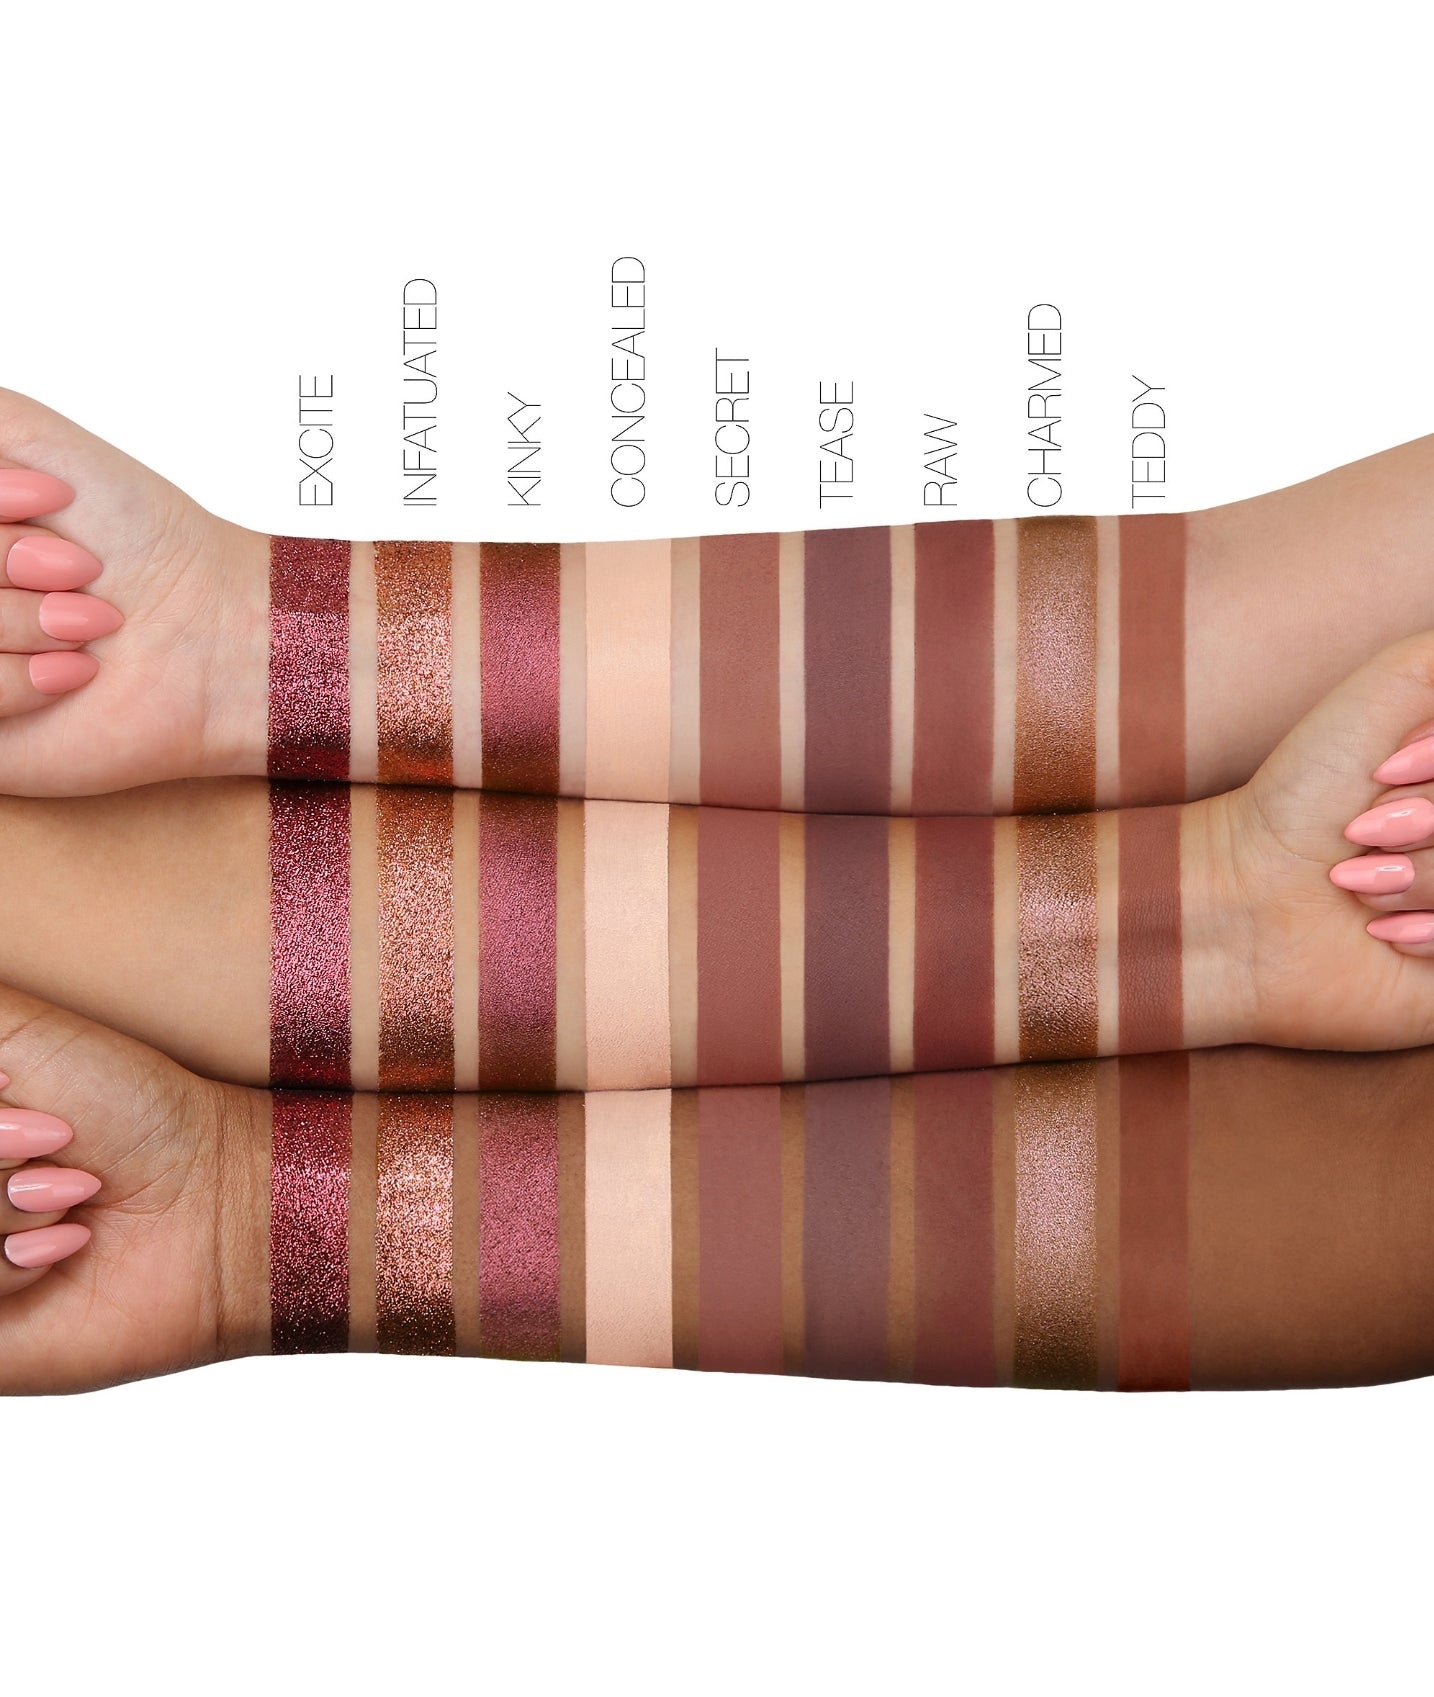 The New Nude eyeshadow palette